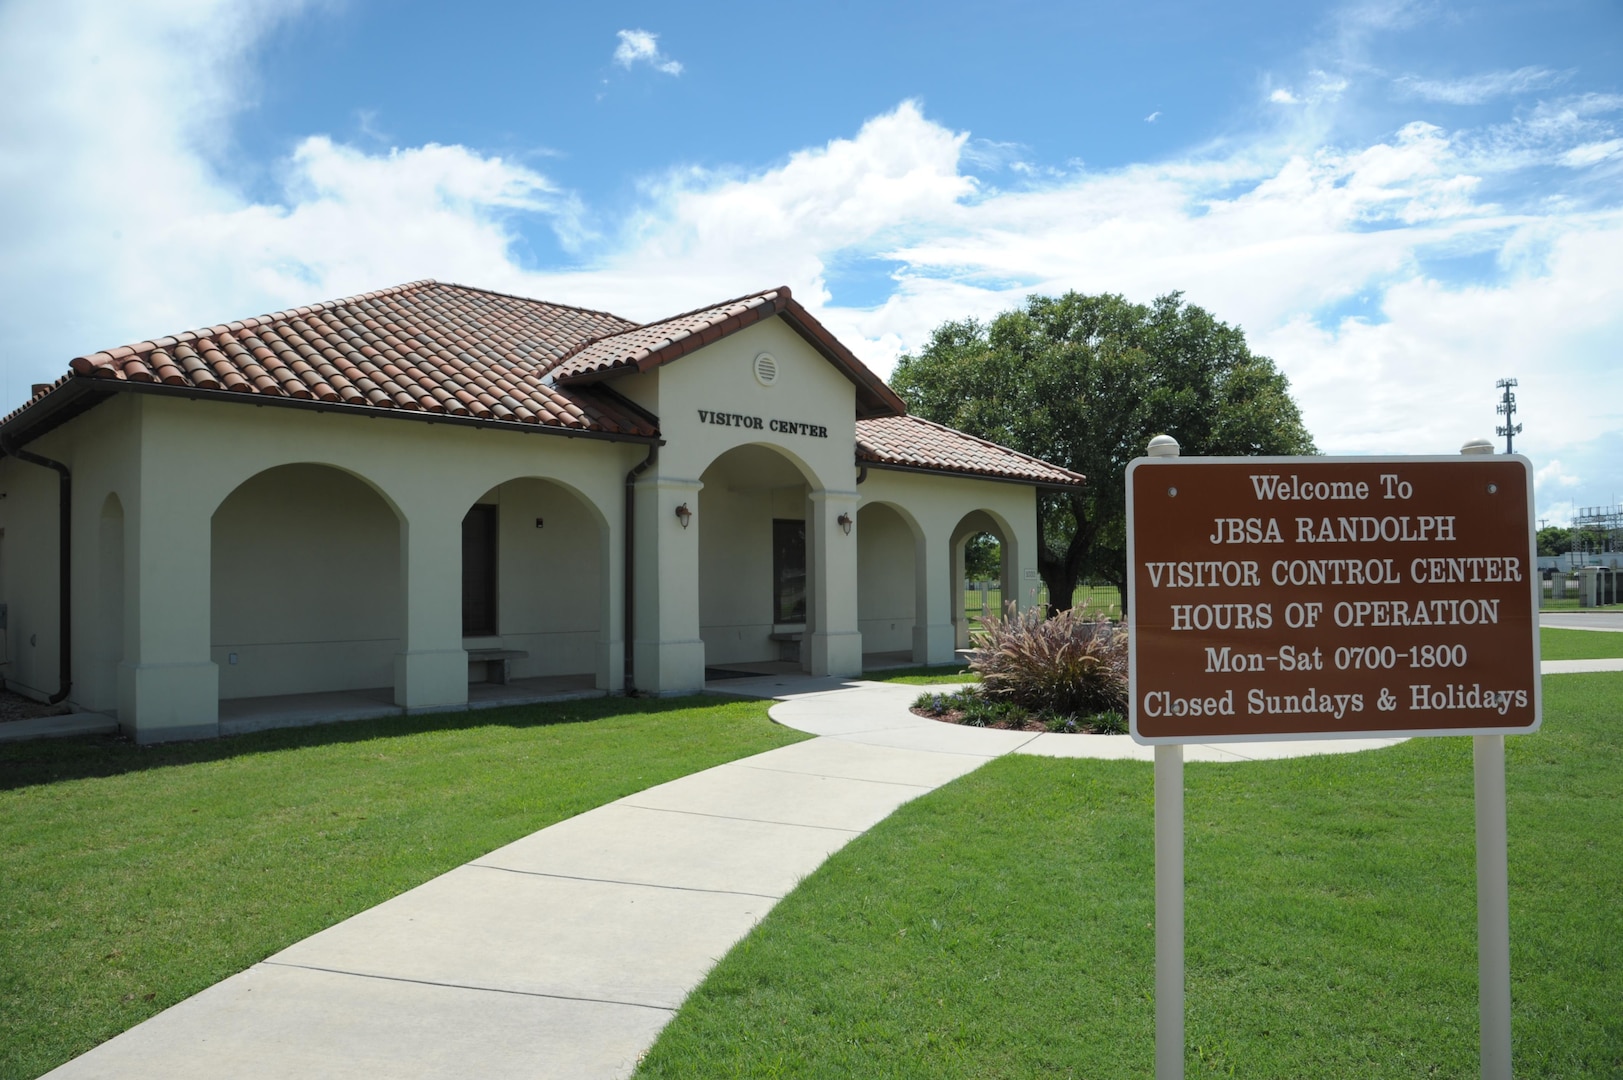 The Joint Base San Antonio-Randolph Visitor Control Center is located at the entrance to the location's main gate at the intersection of FM 78 and Pat Booker Road in Universal City. (U.S. Air Force photo by Joel Martinez/Released)